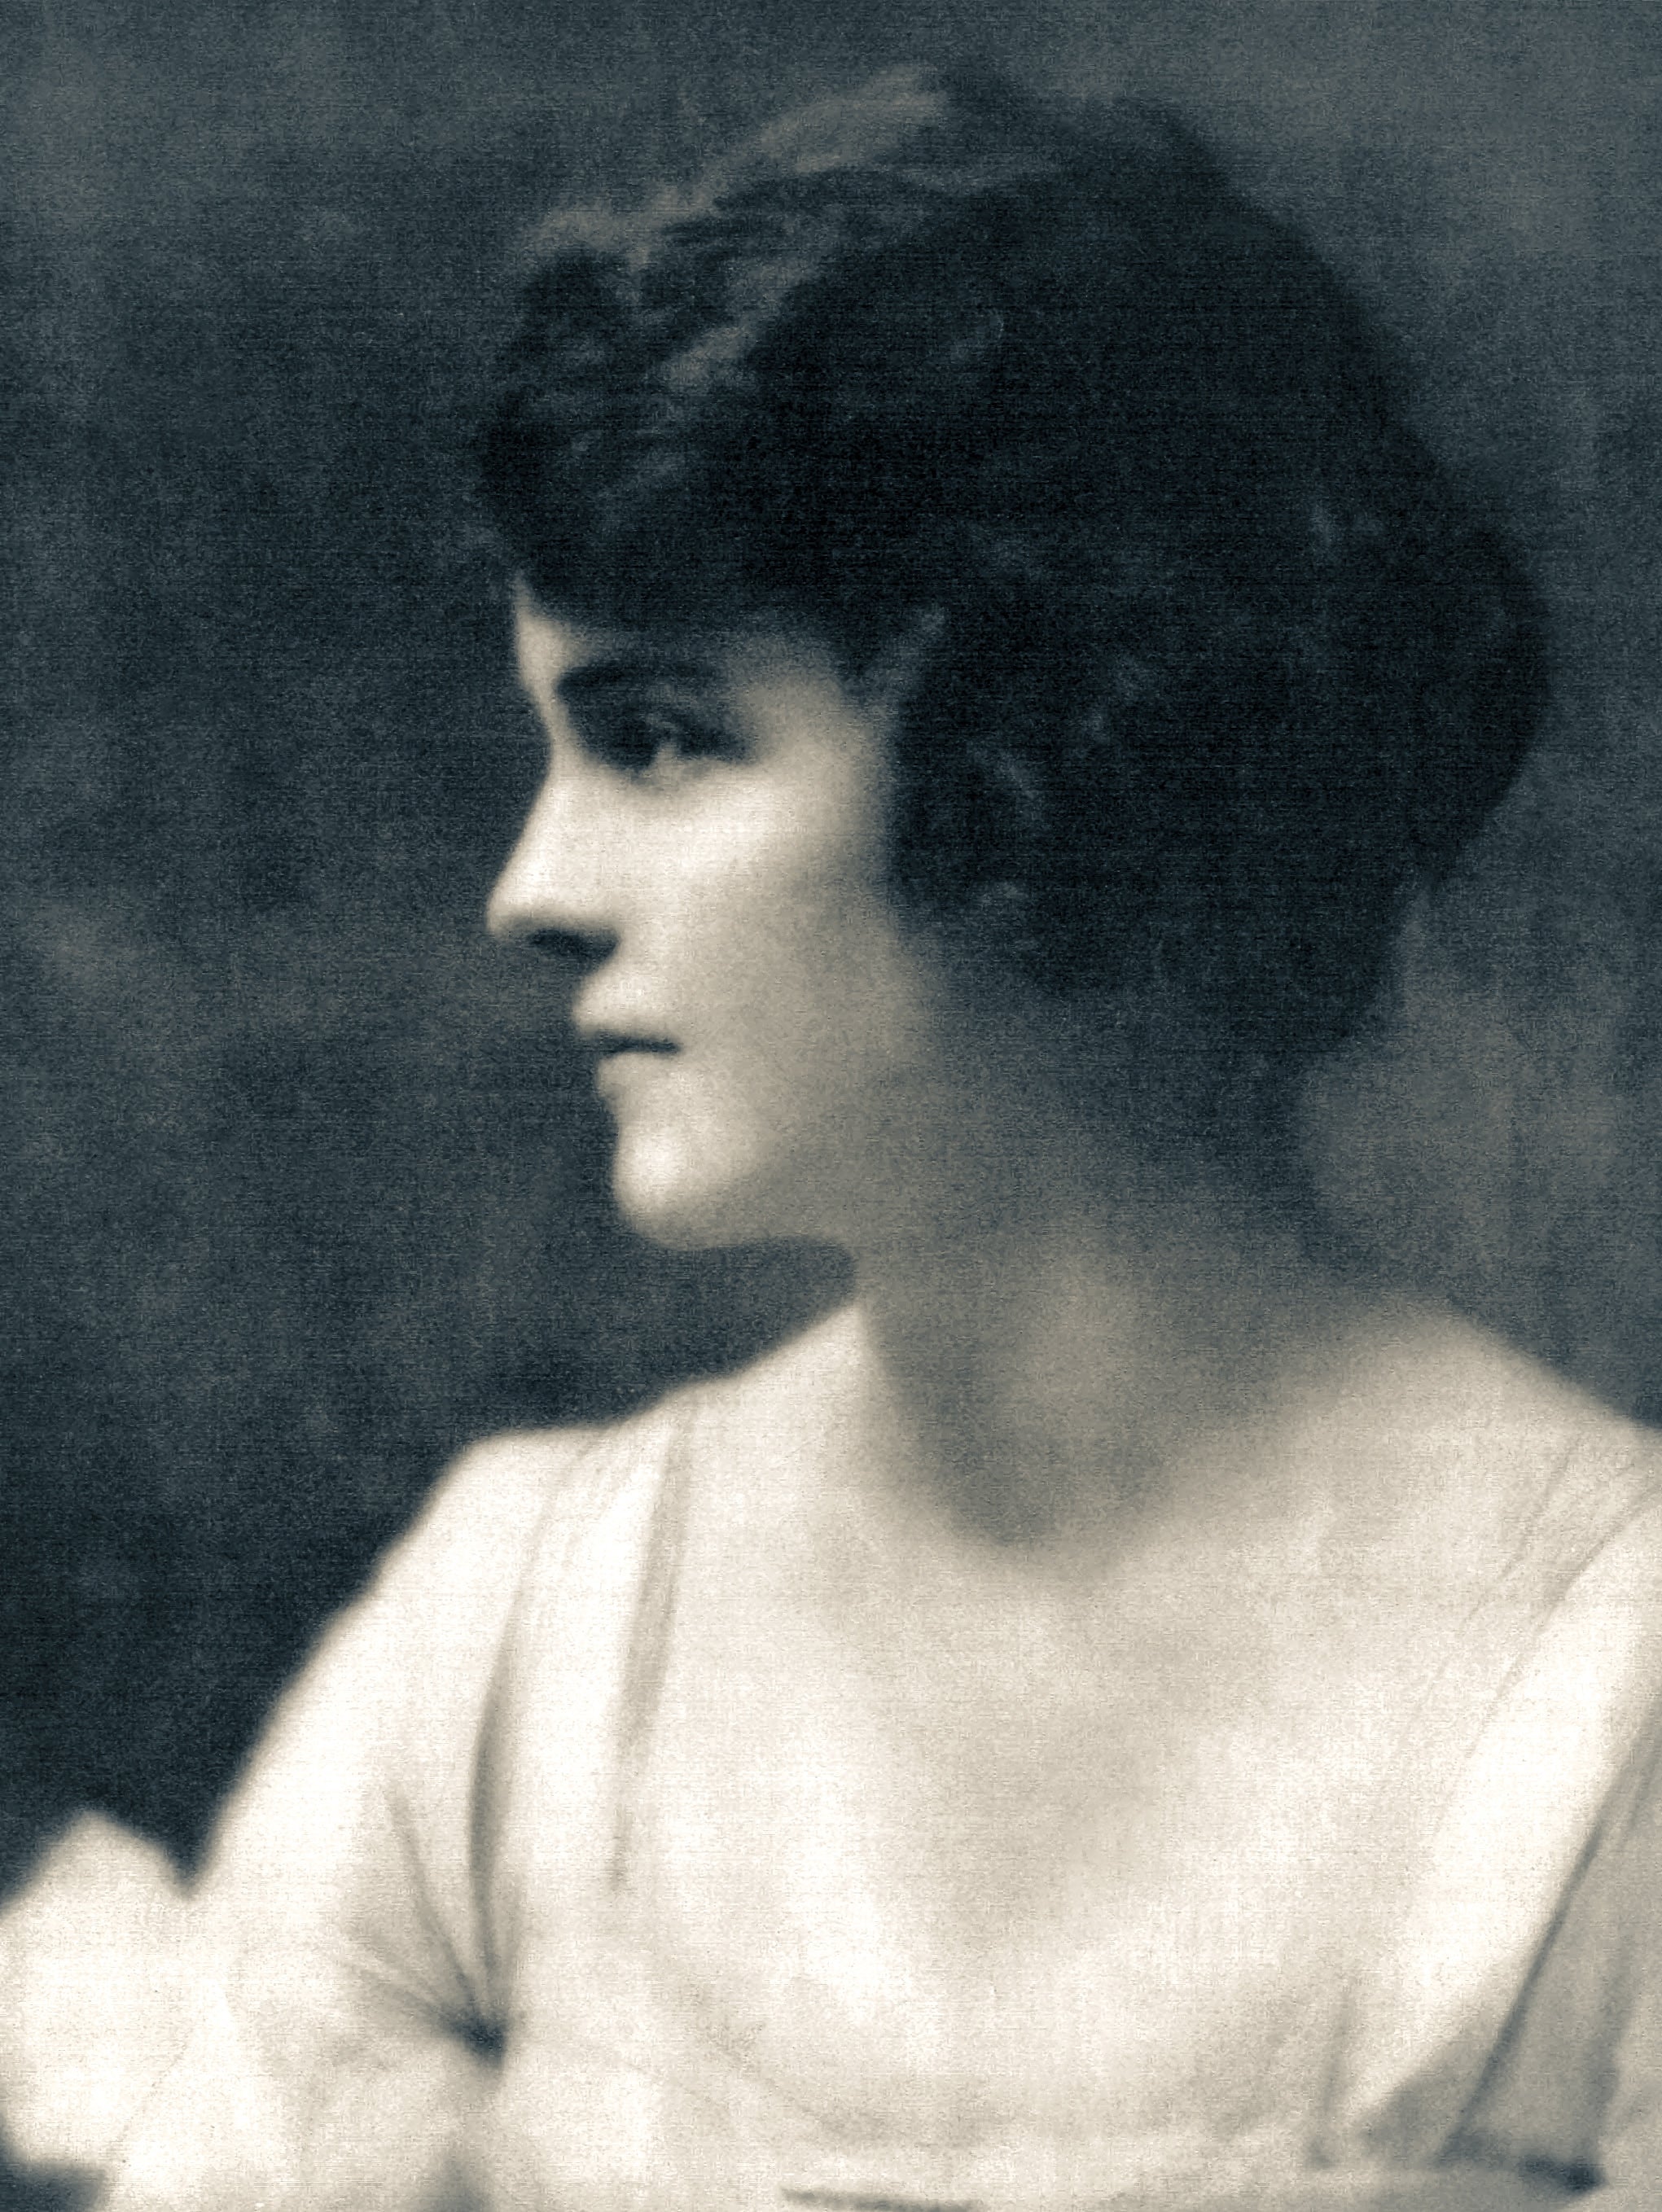 Ginevra King, whom Fitzgerald fell in love with while studying at Princeton